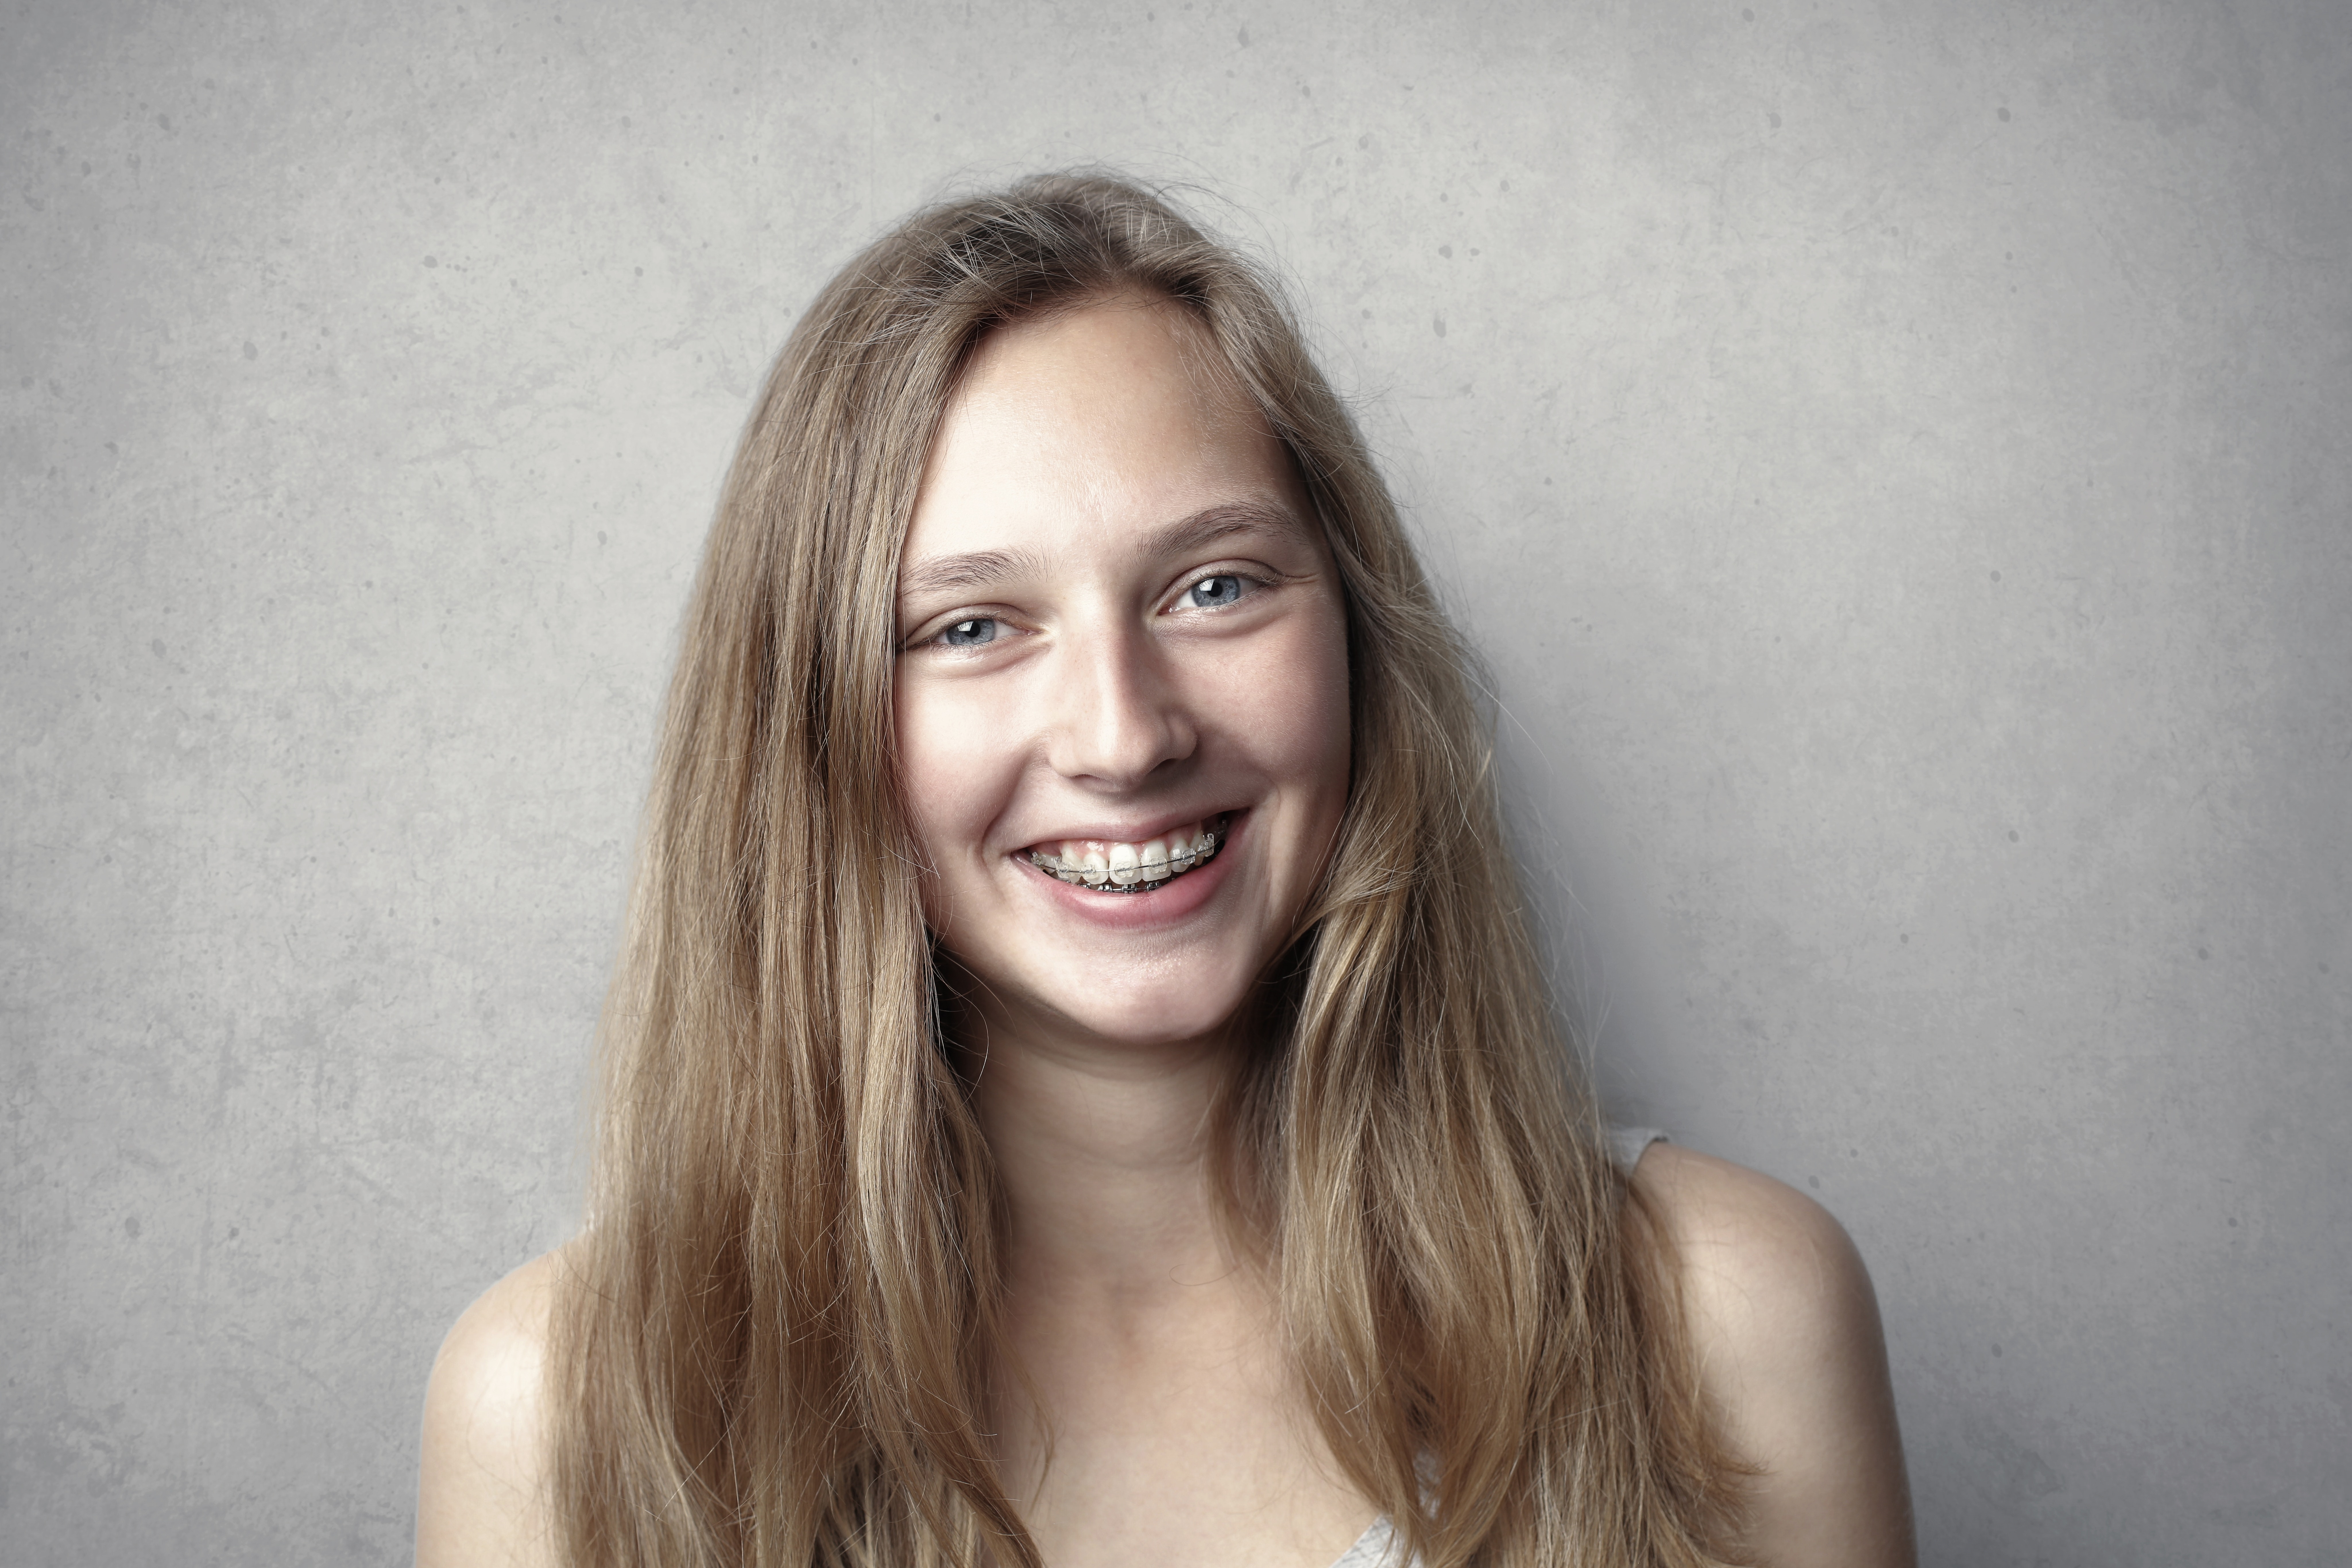 What Should You Avoid When You Have Braces?